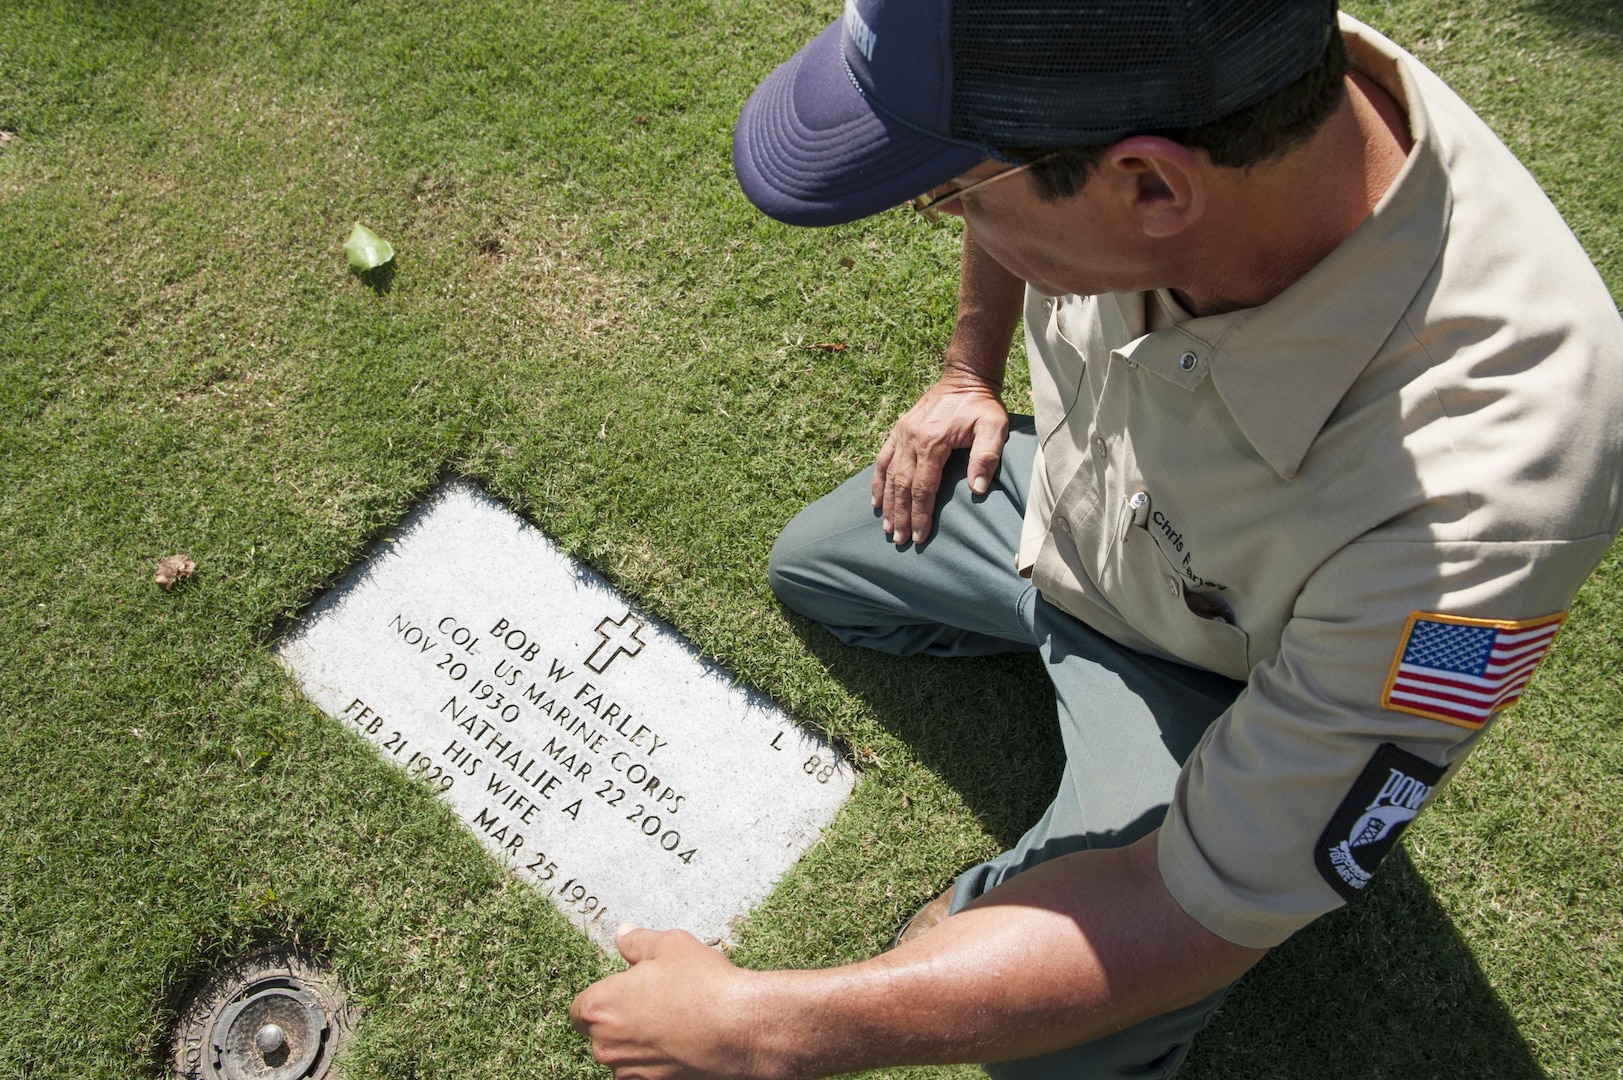 Chris Farley, U.S. Navy veteran and National Memorial Cemetery of the Pacific (NMCP) caretaker, visits the resting place of his parents at the NMCP Nov. 28, 2015, in Honolulu. Farley is a U.S. Navy veteran who served from 1982 to 1987 as an air traffic controller. He is responsible for the maintenance of the 112.5 acres of land that make up the cemetery, the 56,971 gravesites of those who are interred in-ground or in-columbarium, and the 28,788 fallen who are memorialized in the courts of the missing. (U.S. Air Force photo by Staff Sgt. Christopher Hubenthal)